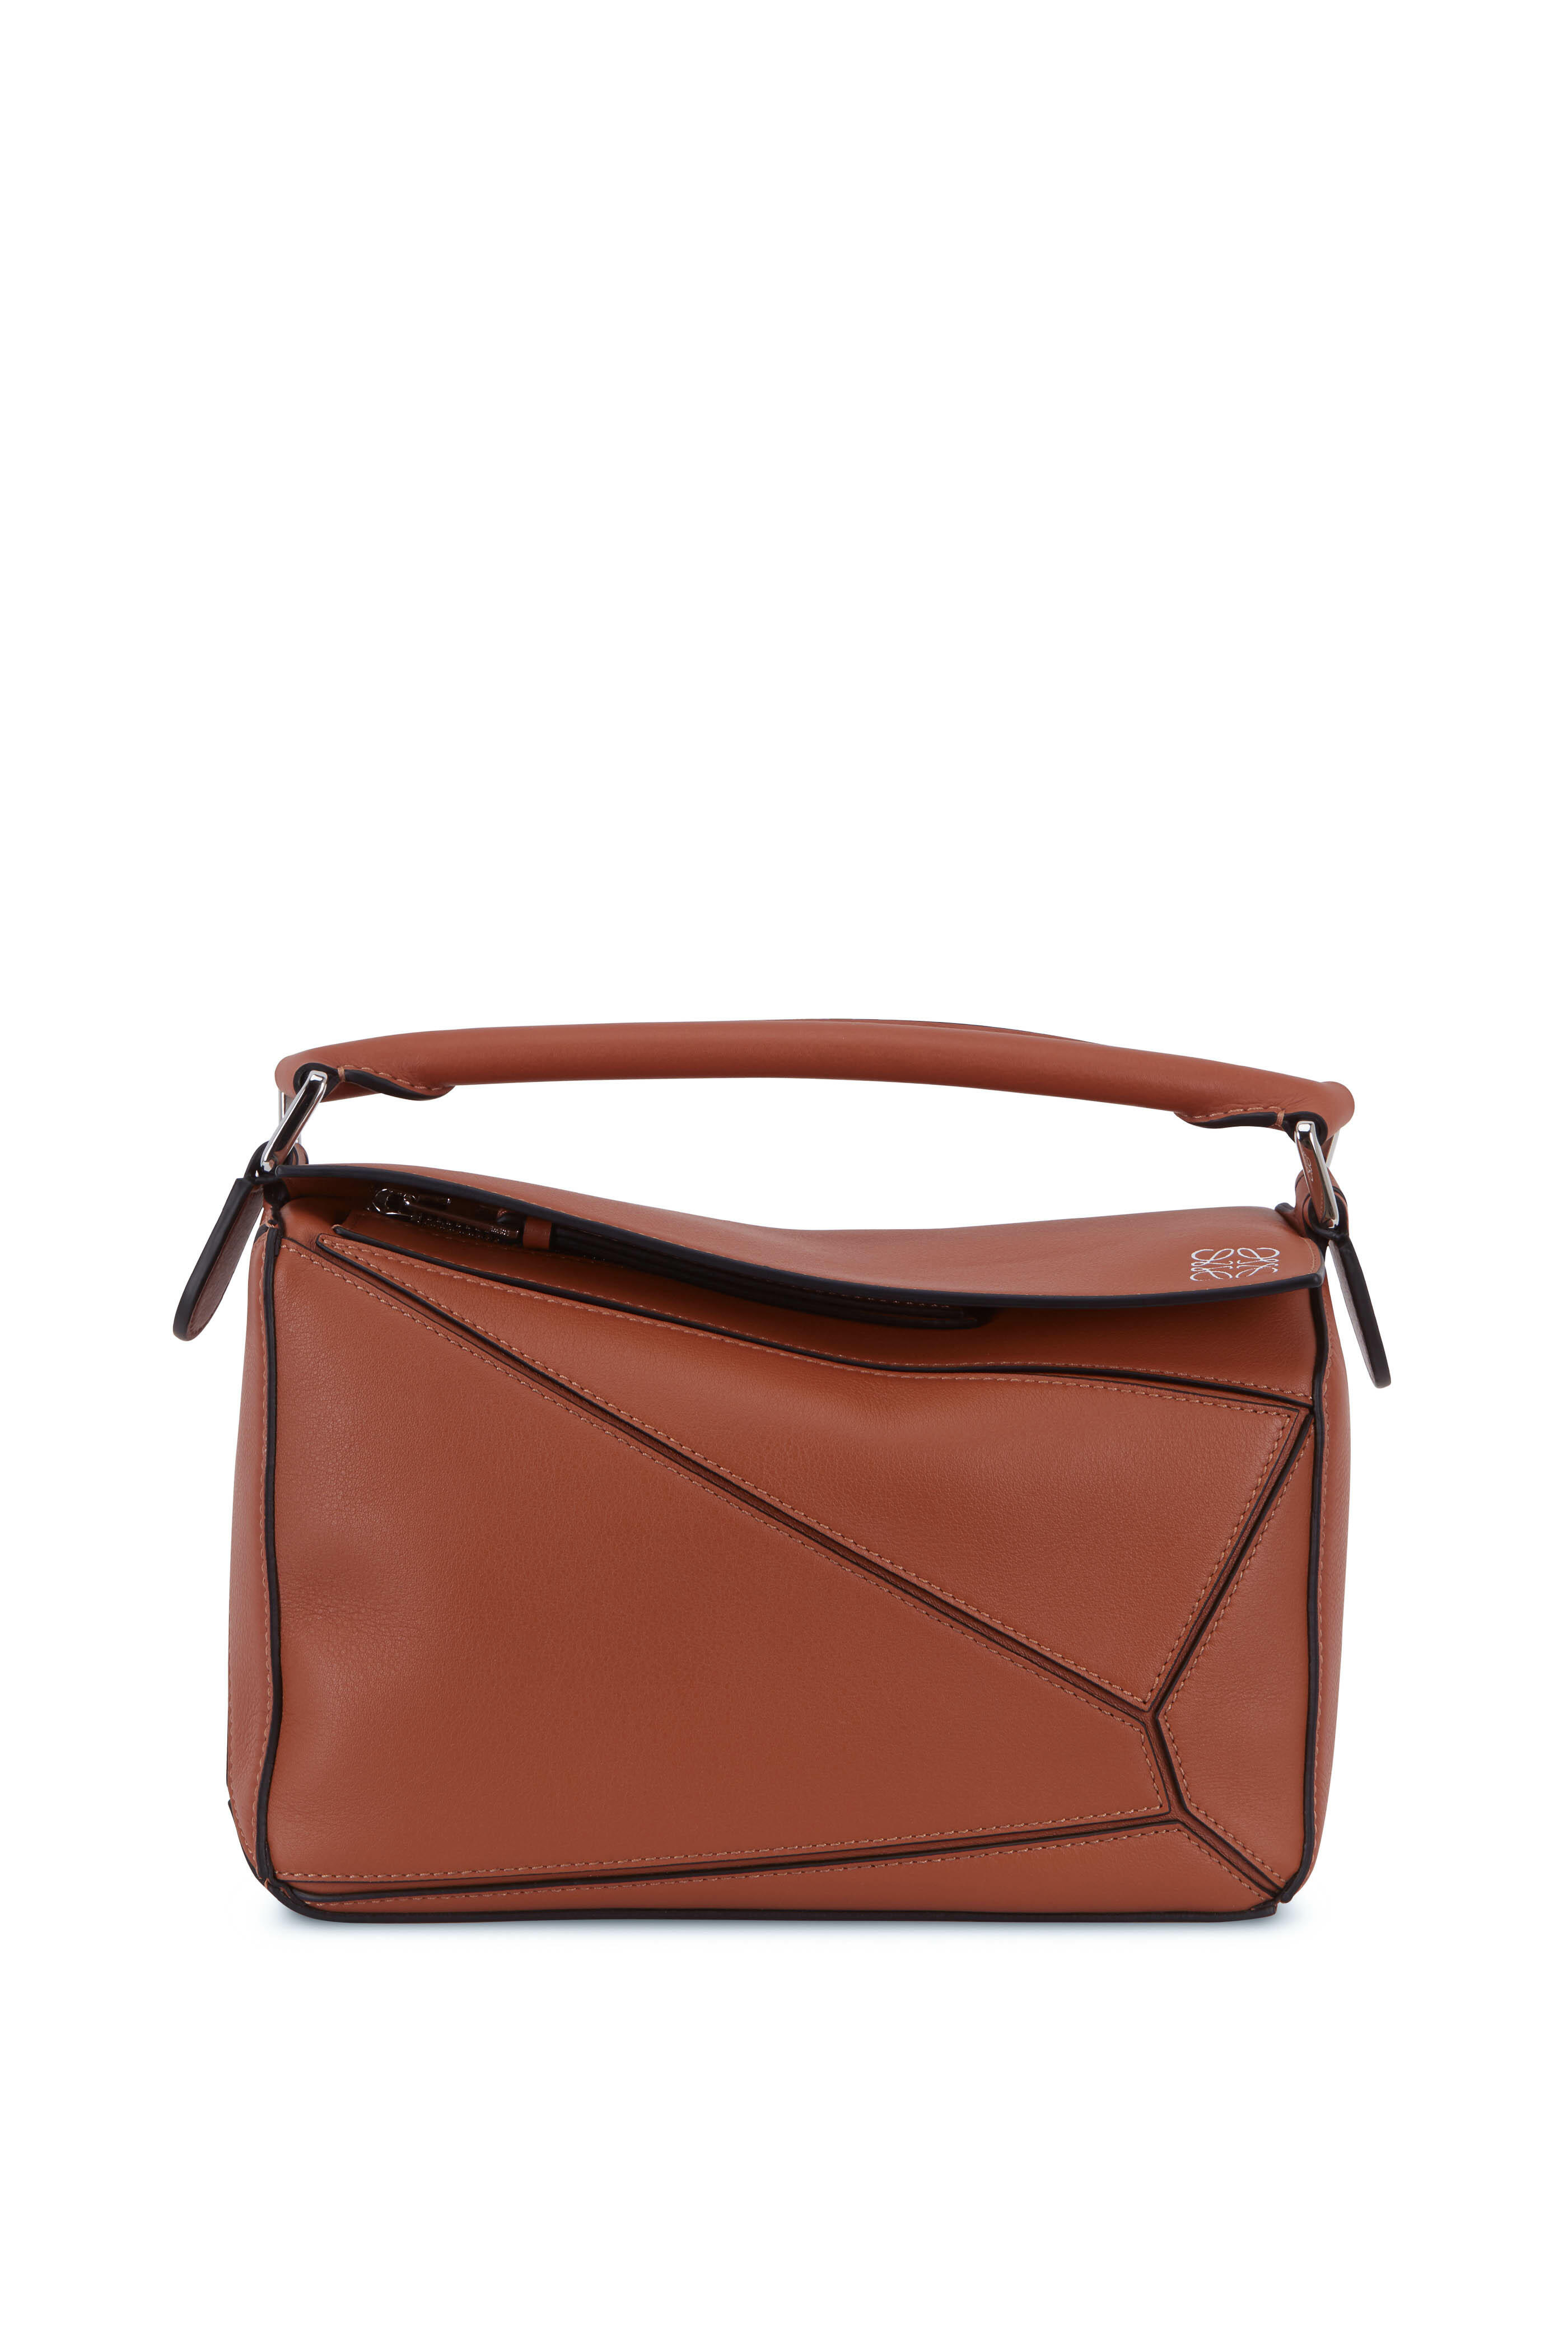 Loewe - Puzzle Taupe Leather Top Handle Bag